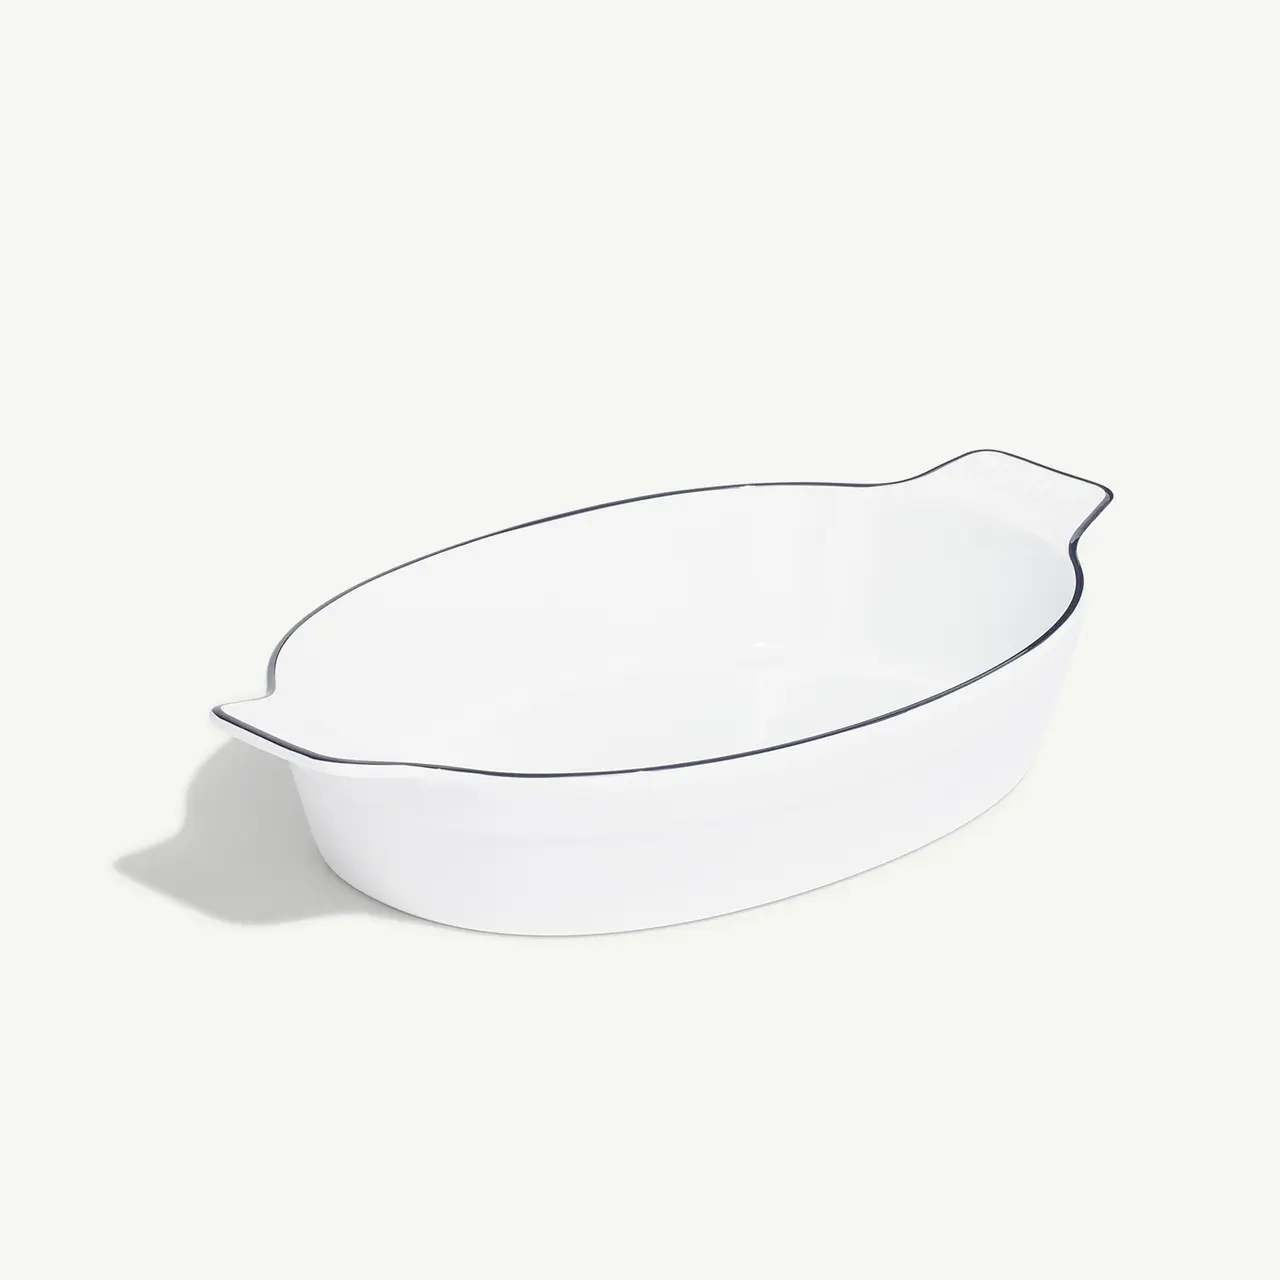 A white ceramic oval baking dish with fluted edges sits against a plain background.